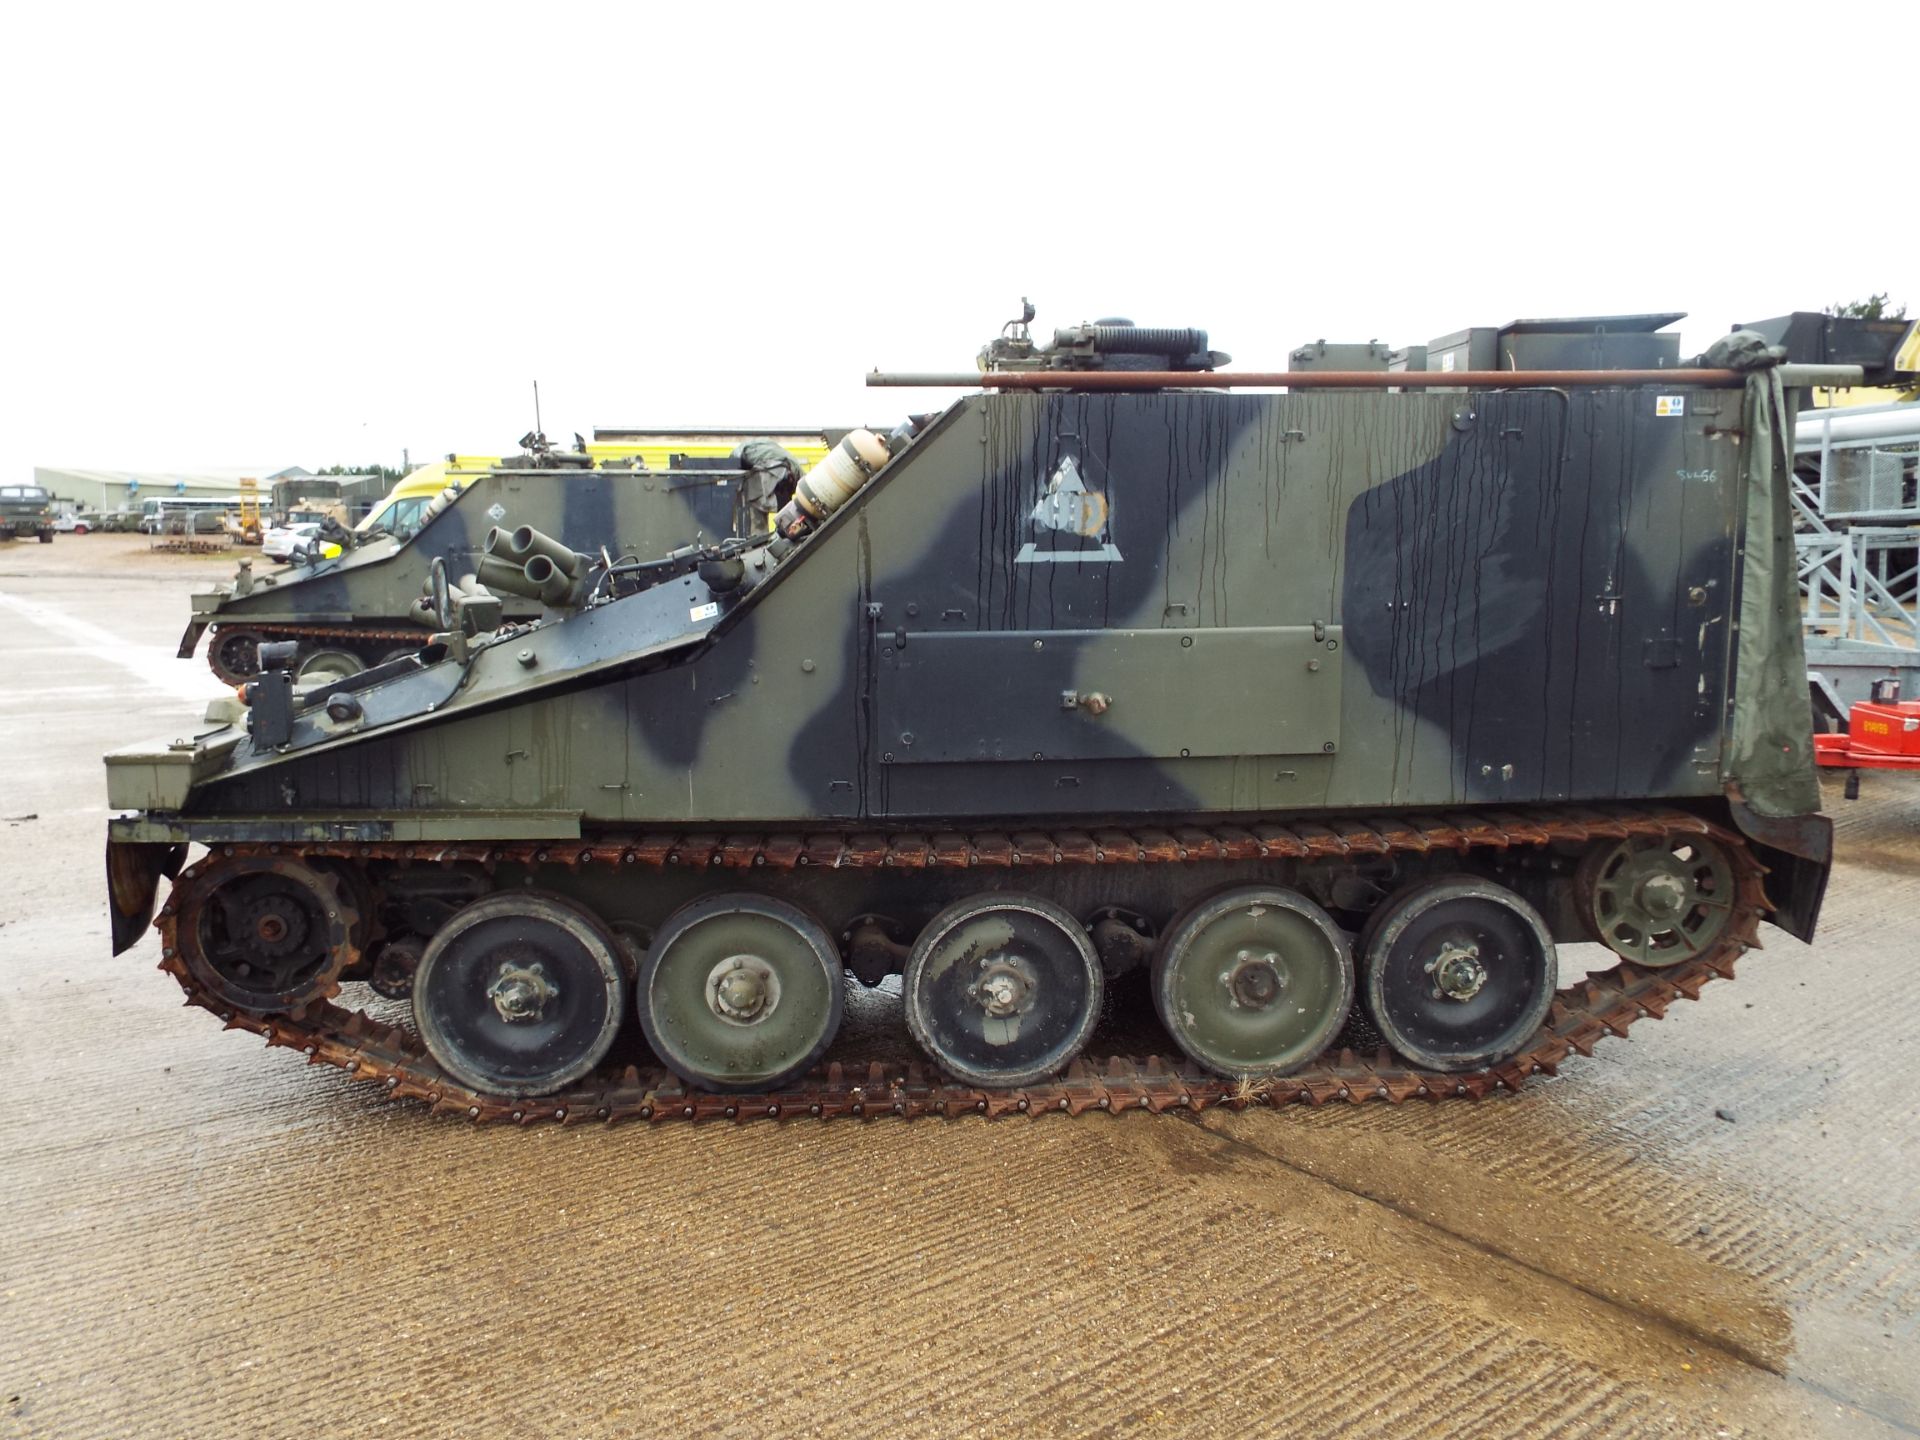 CVRT (Combat Vehicle Reconnaissance Tracked) FV105 Sultan Armoured Personnel Carrier - Image 4 of 31